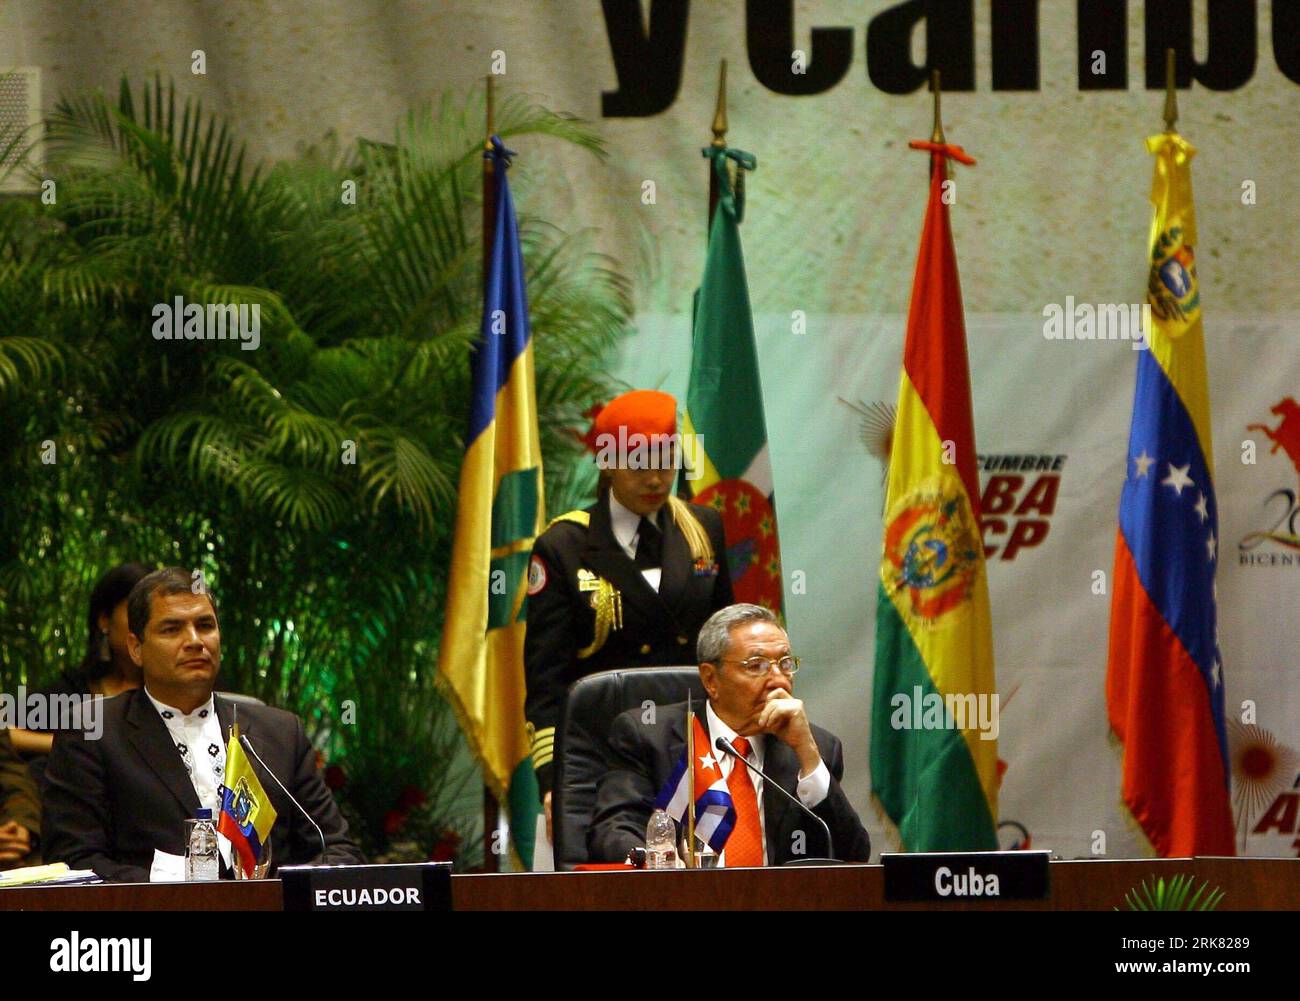 Bildnummer: 53957708  Datum: 19.04.2010  Copyright: imago/Xinhua (100420) -- CARACAS, April 20, 2010 (Xinhua) -- Ecuadorian President Rafael Correa (L) and Cuban leader Raul Castro attend the 9th Bolivarian Alliance for America (ALBA) Summit in Caracas, capital of Venezuela, April 19, 2010. As Latin America celebrates the bicentennial of the beginning of its fight for independence, the eight member nations of ALBA on Monday vowed to further promote political, economic and social integration. (Xinhua/Juan Carlos Hernandez) (zcq) (4)VENEZUELA-CARACAS-ALBA SUMMIT PUBLICATIONxNOTxINxCHN People Pol Stock Photo